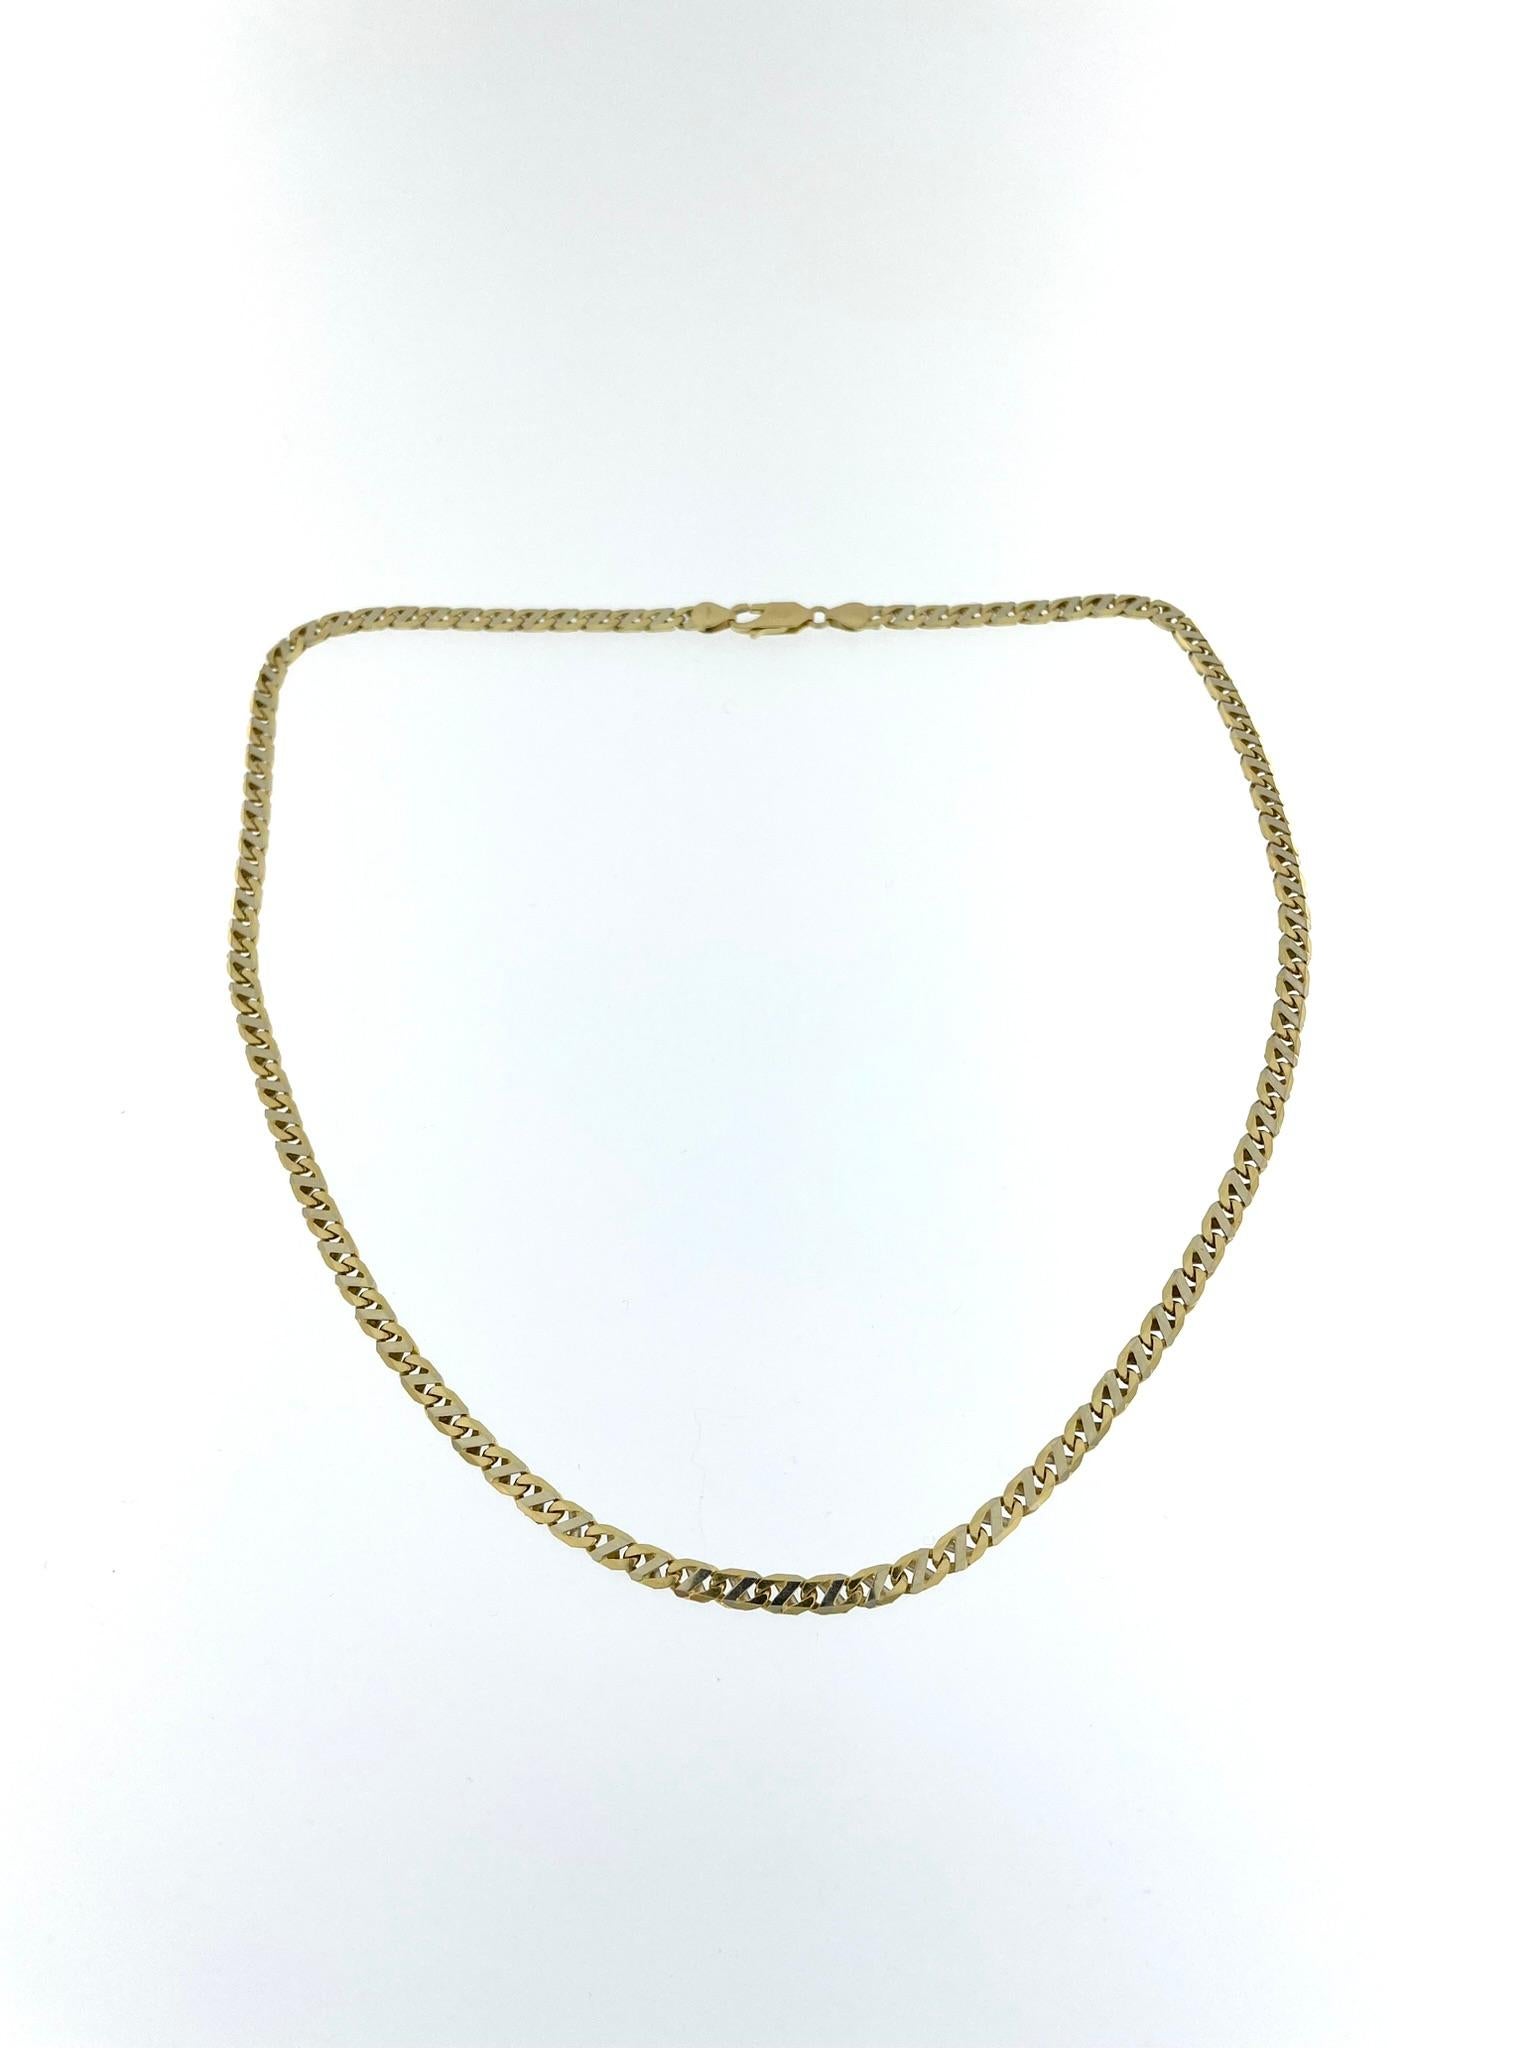 The Italian Yellow and White Gold Chain Necklace is an exquisite piece of jewelry crafted with precision and elegance. This necklace is made from 18-karat gold, showcasing a stunning combination of yellow and white gold. The use of both colors adds